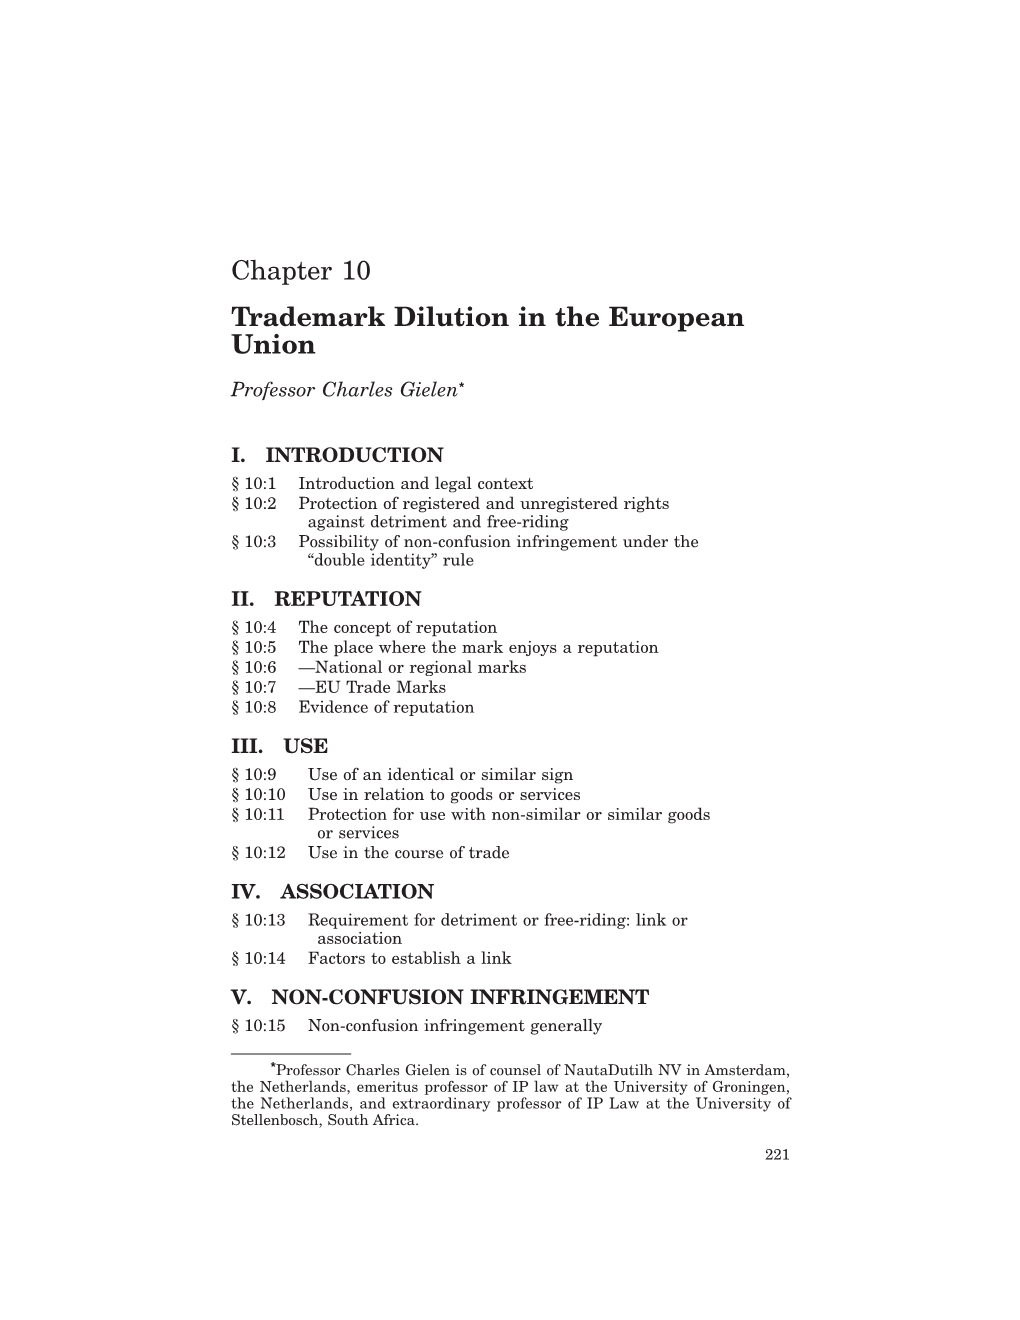 Trademark Dilution in the European Union